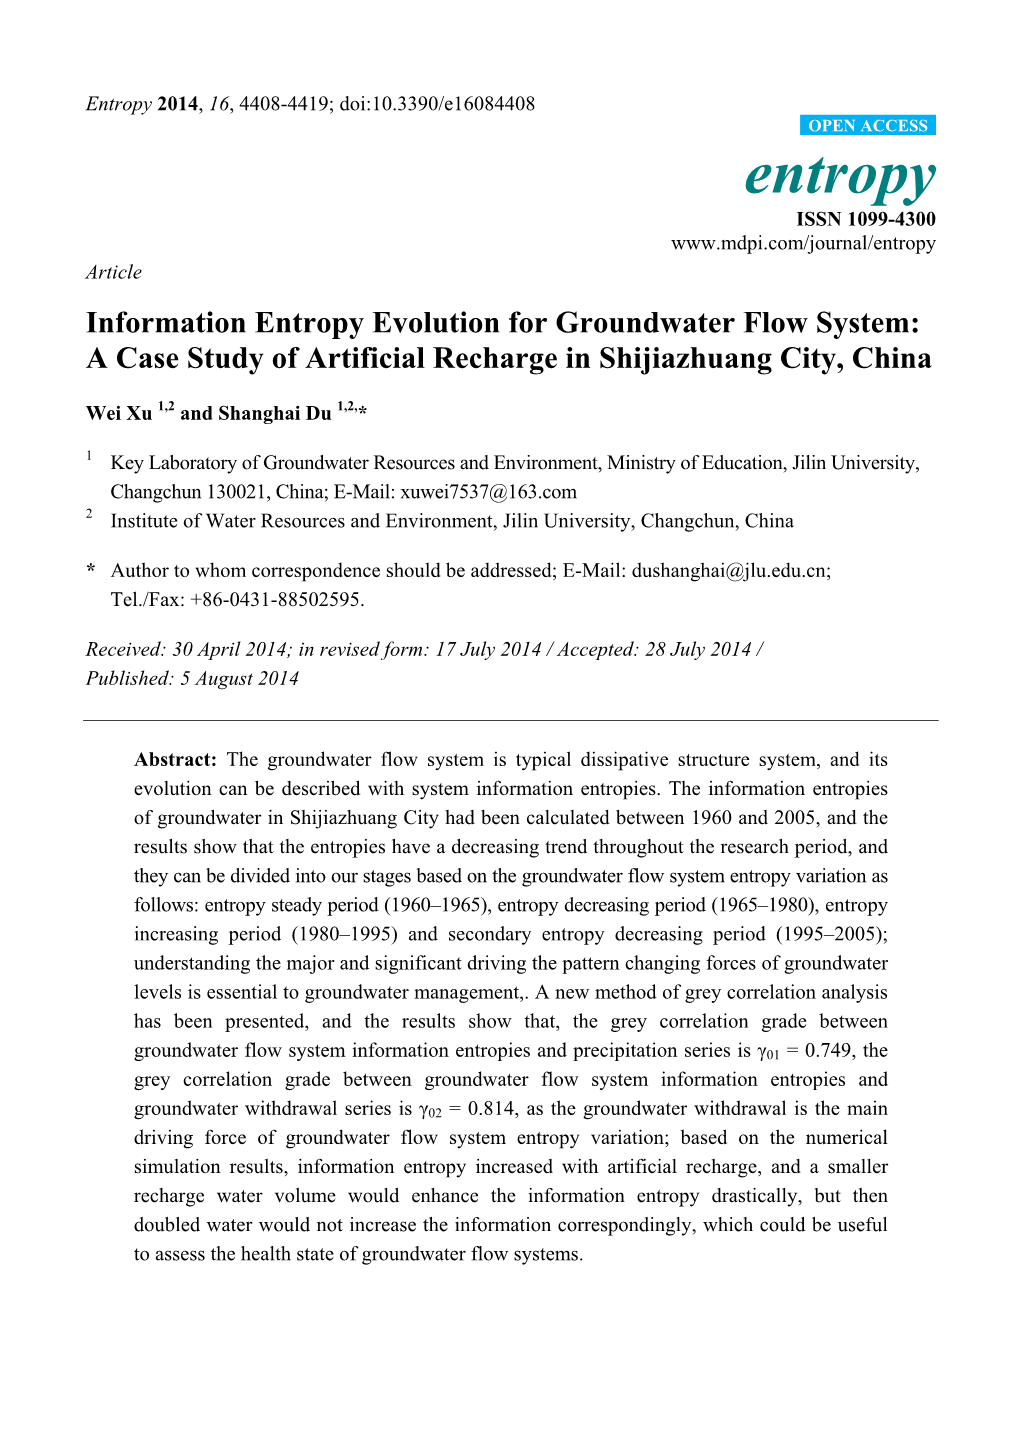 Information Entropy Evolution for Groundwater Flow System: a Case Study of Artificial Recharge in Shijiazhuang City, China